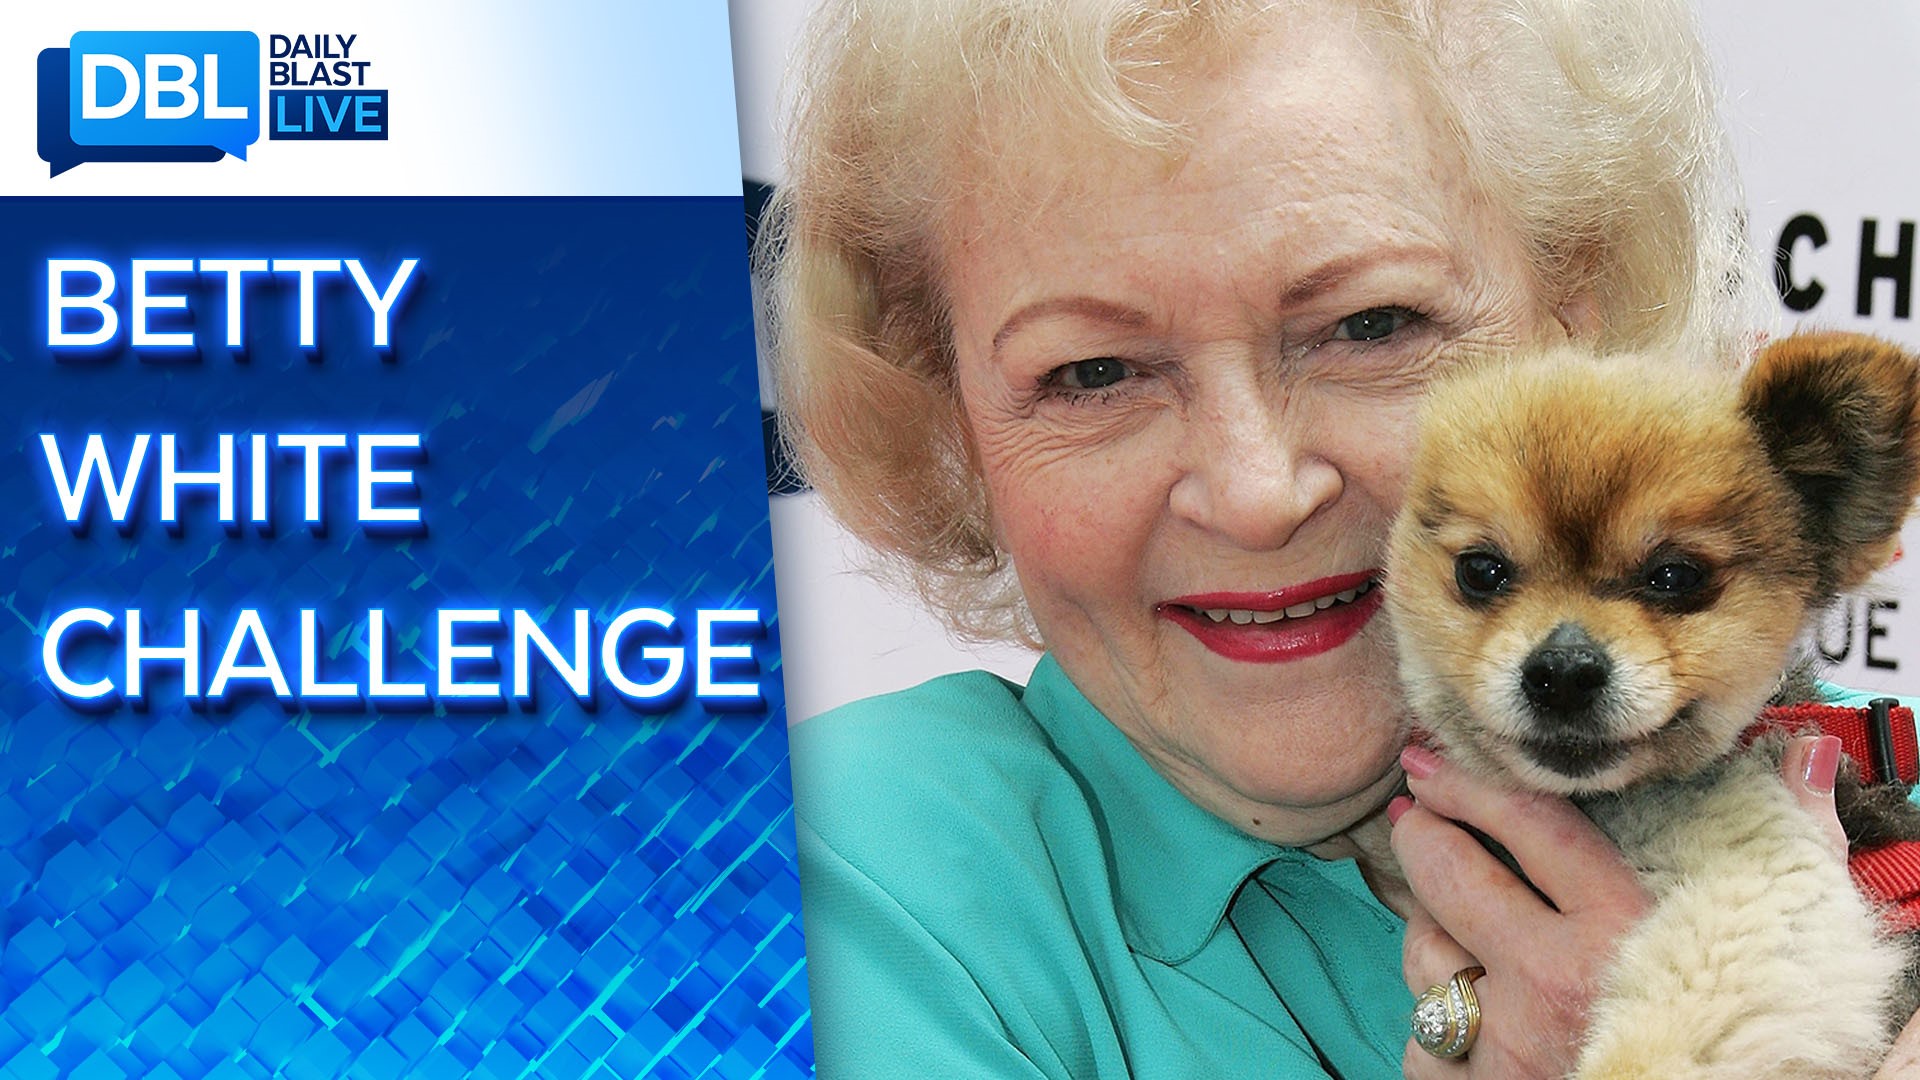 Countless people took part in the 'Betty White Challenge' that encouraged donations to support animals, a cause that was close to Betty's heart.